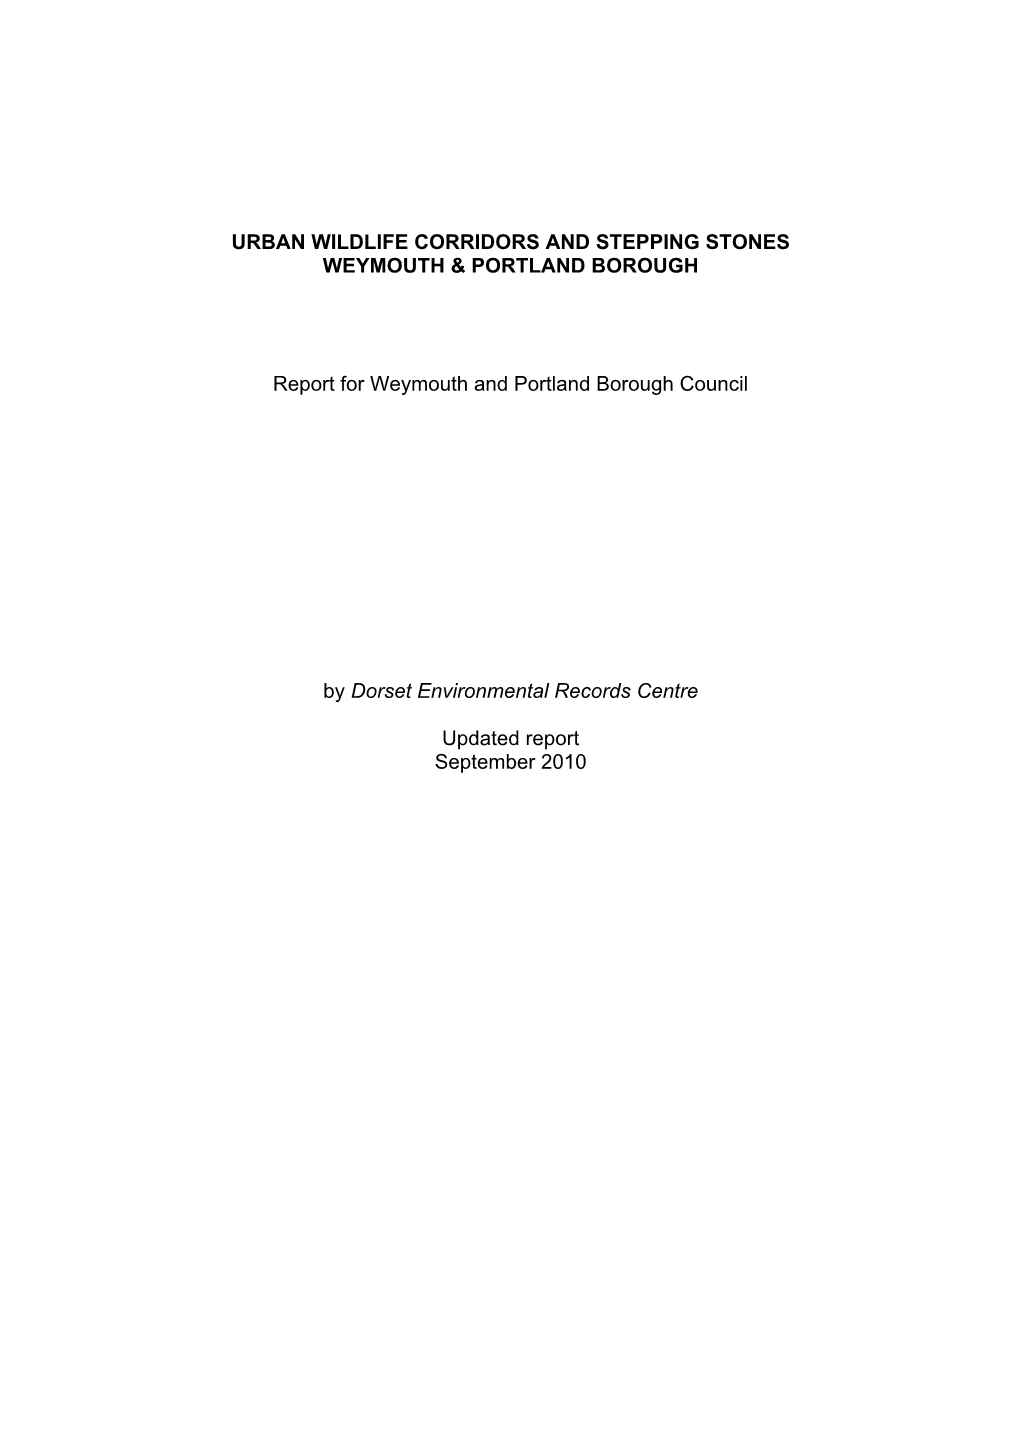 URBAN WILDLIFE CORRIDORS and STEPPING STONES WEYMOUTH & PORTLAND BOROUGH Report for Weymouth and Portland Borough Council By